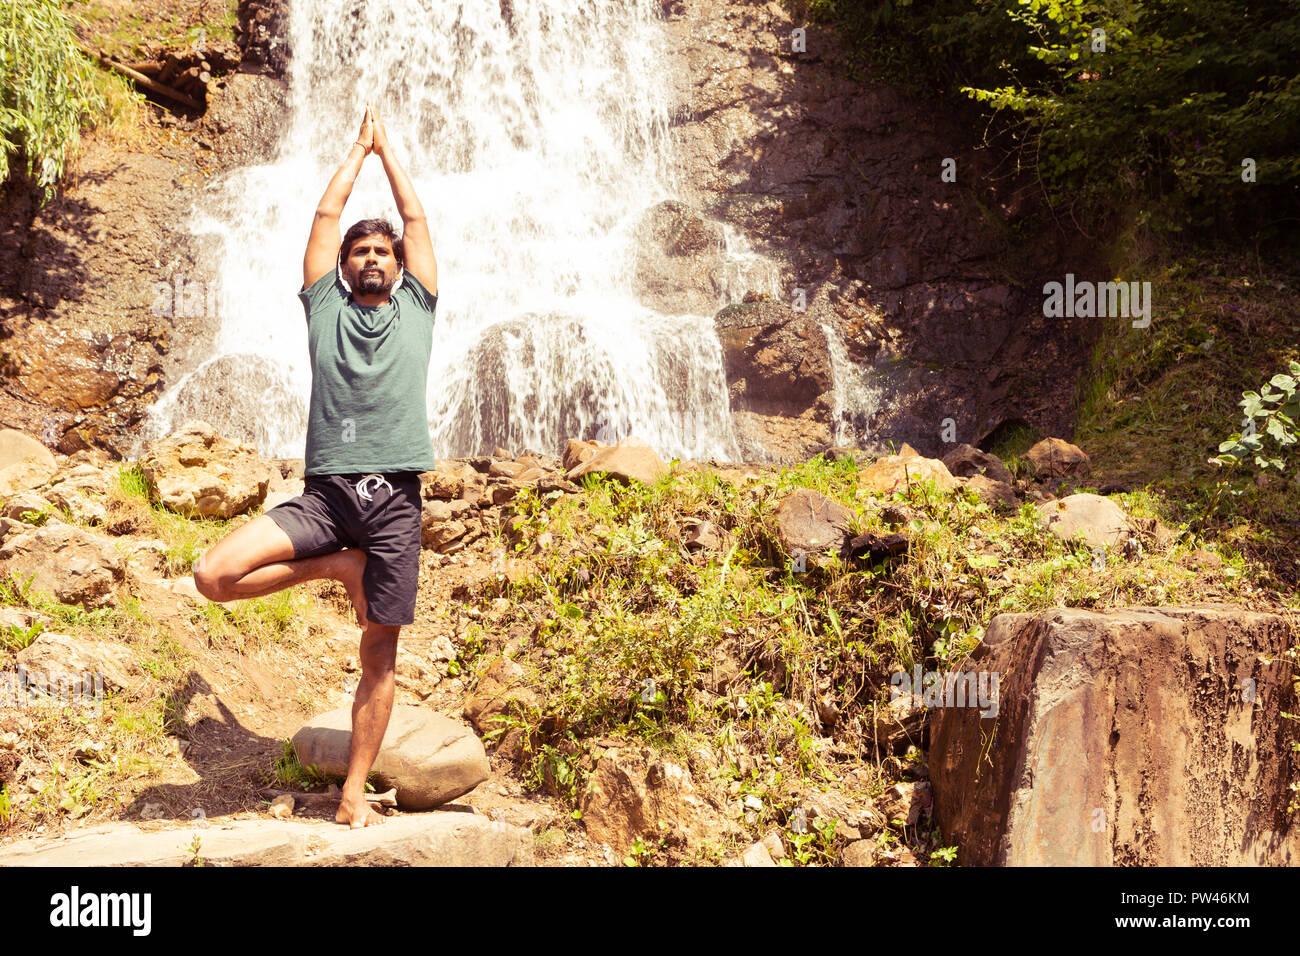 Tree yoga position practiced near waterfall by indian yogi with natural background Stock Photo